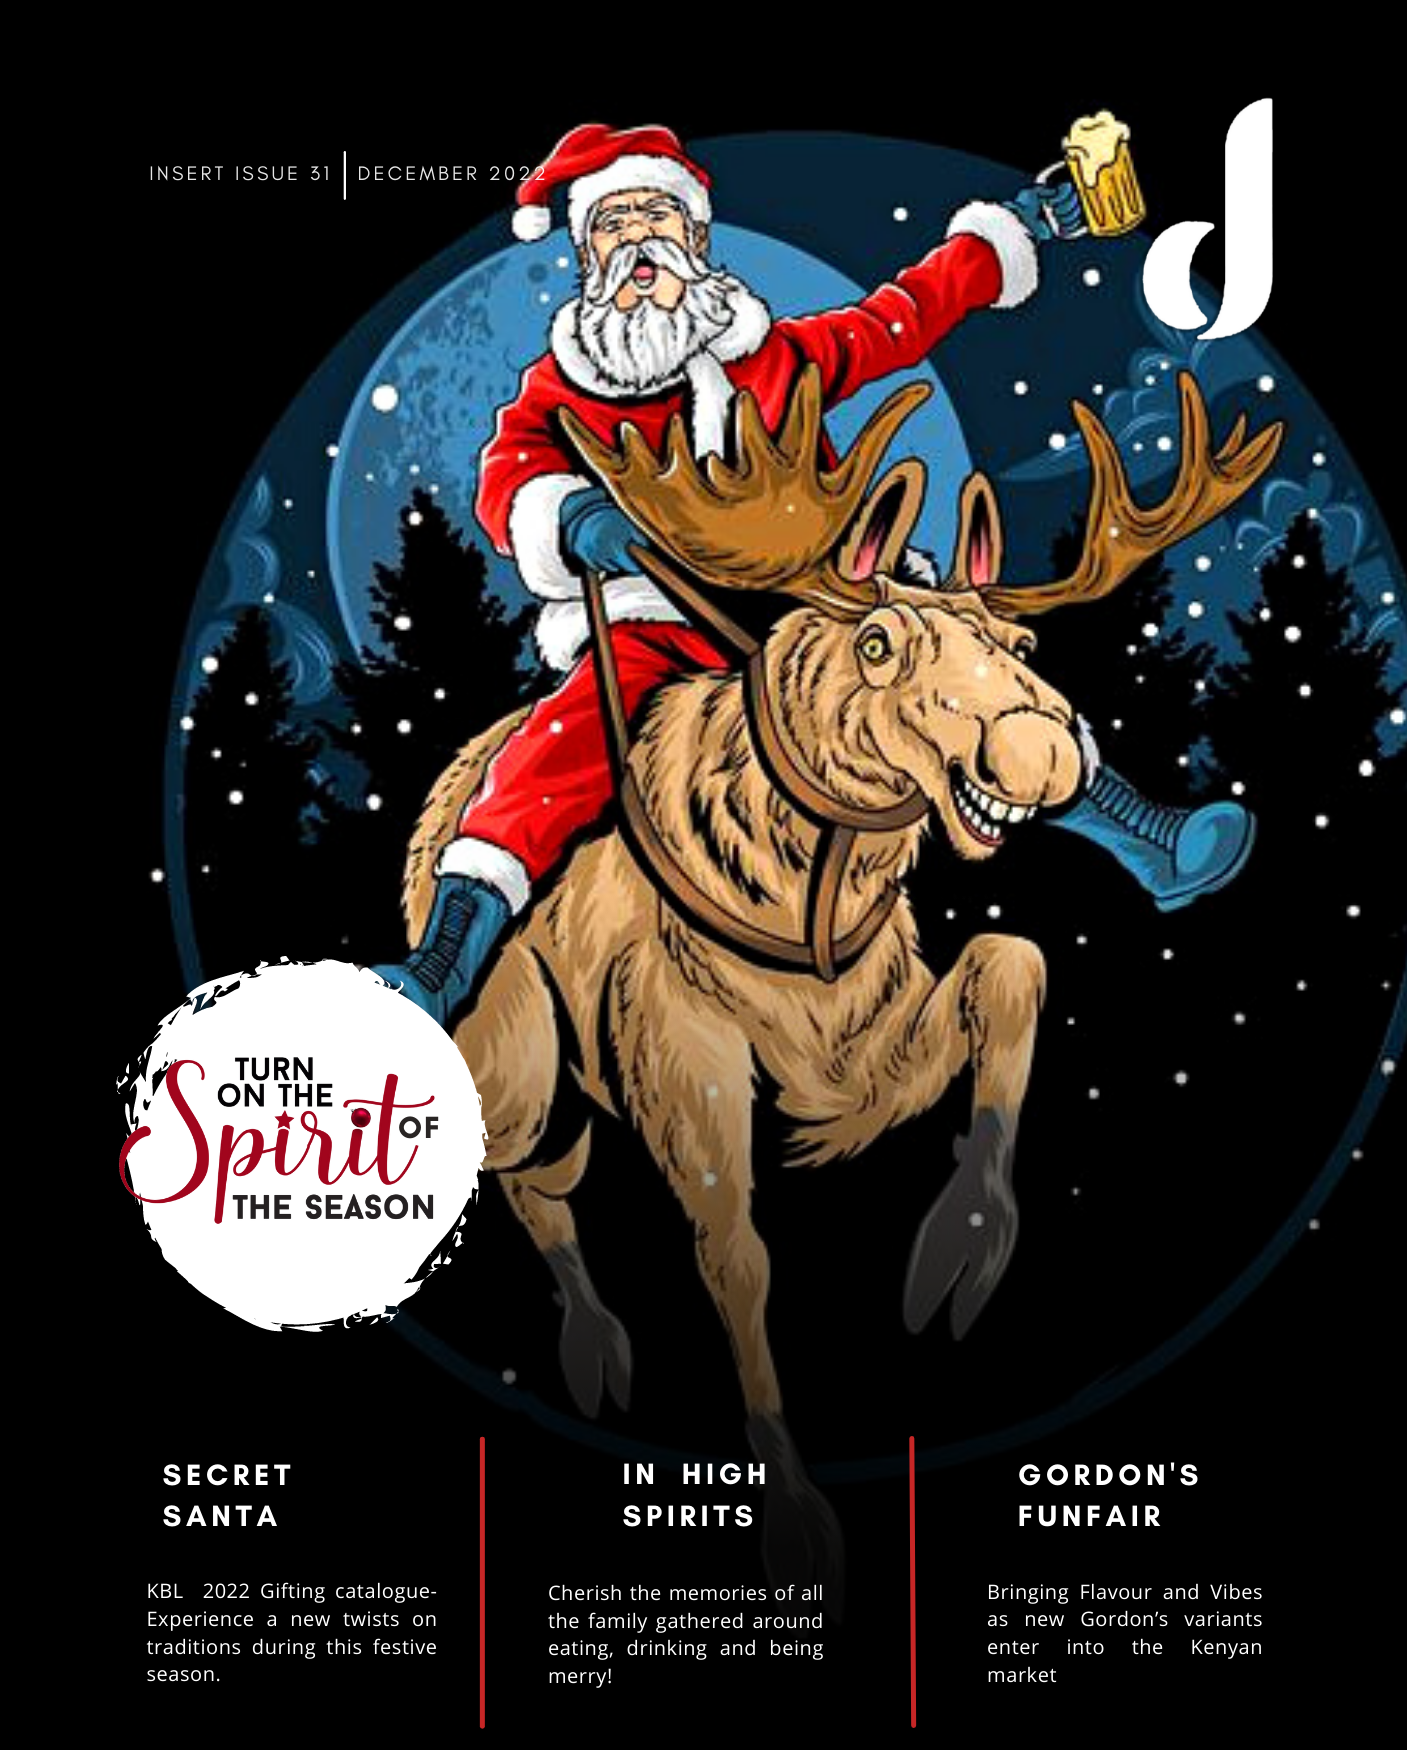 SPECIAL EDITION ISSUE 31 – TURN ON THE SPIRIT OF THE SEASON